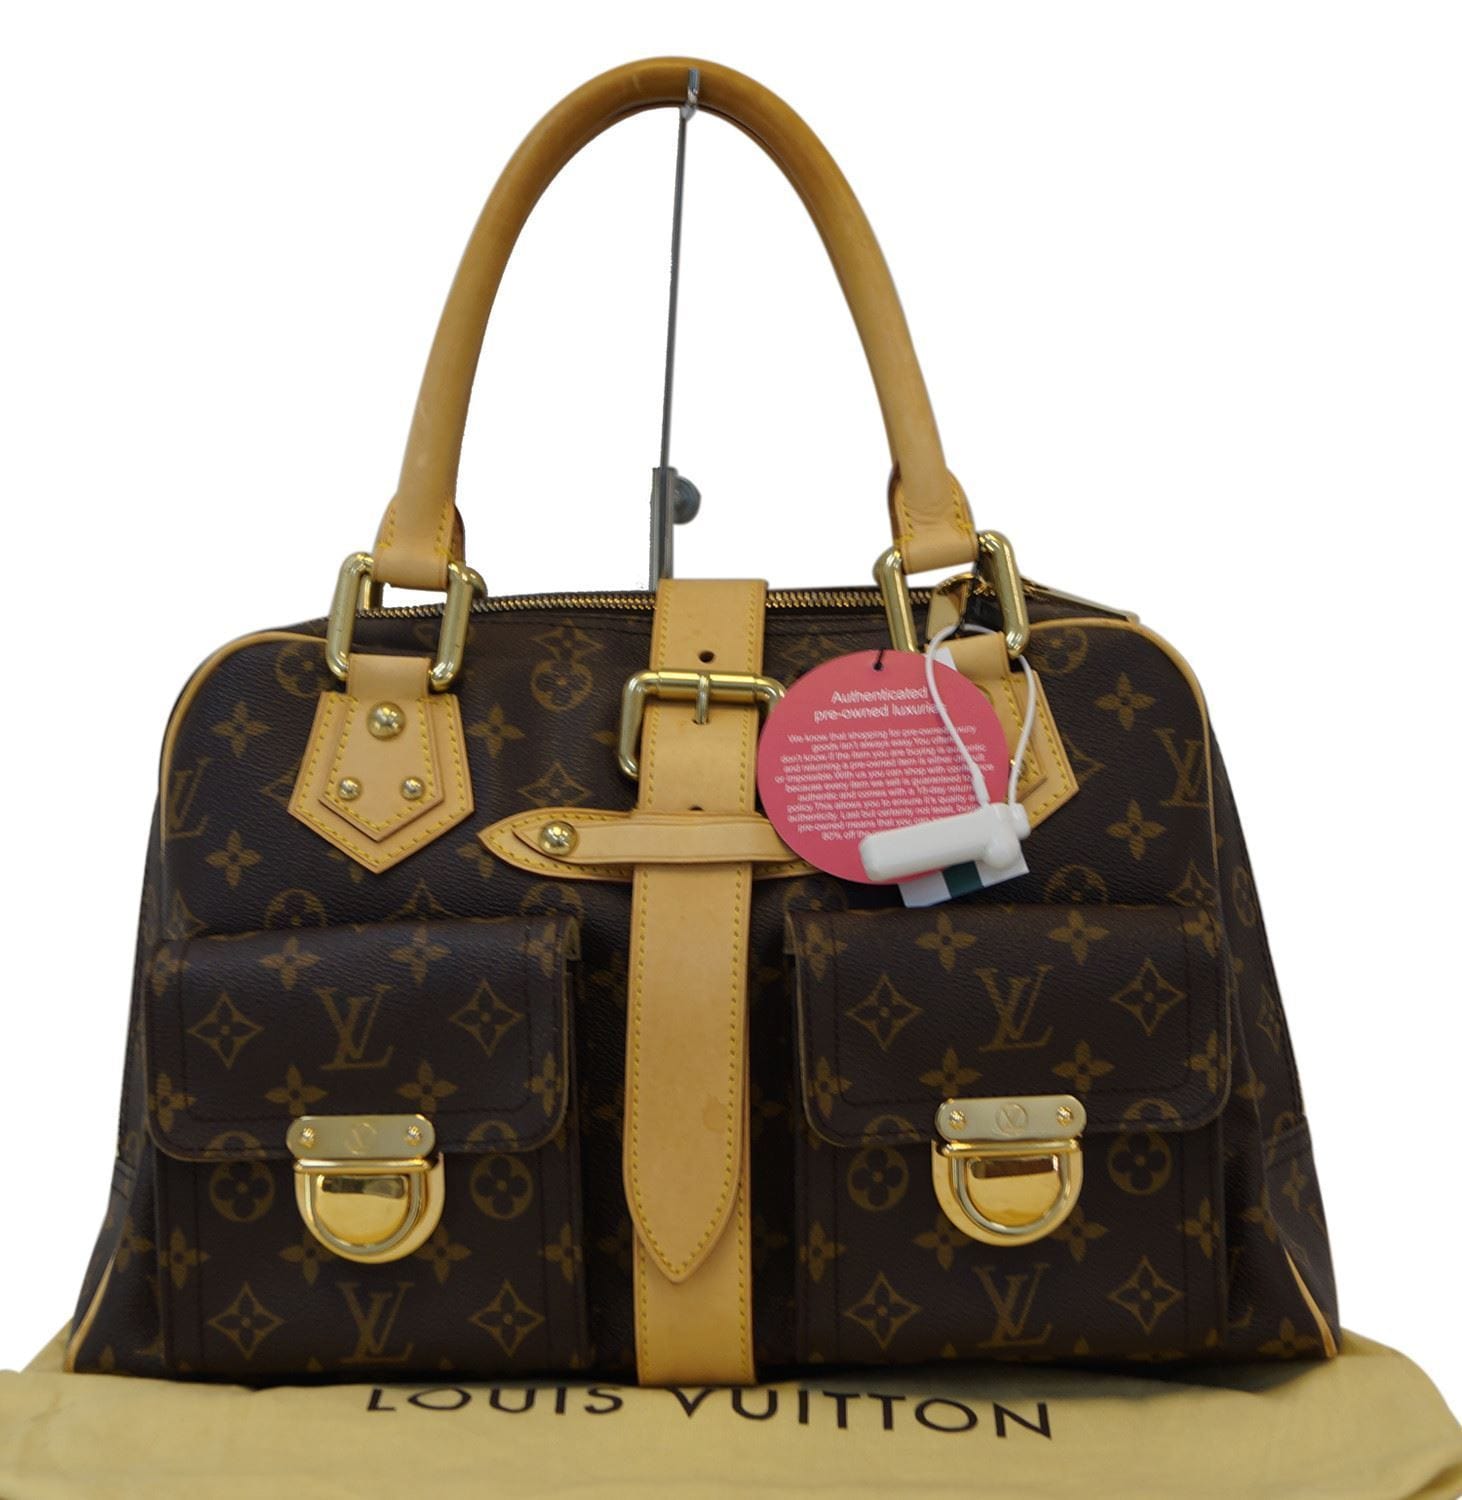 Louis Vuitton - Authenticated  Handbag - Leather Brown for Women, Good Condition